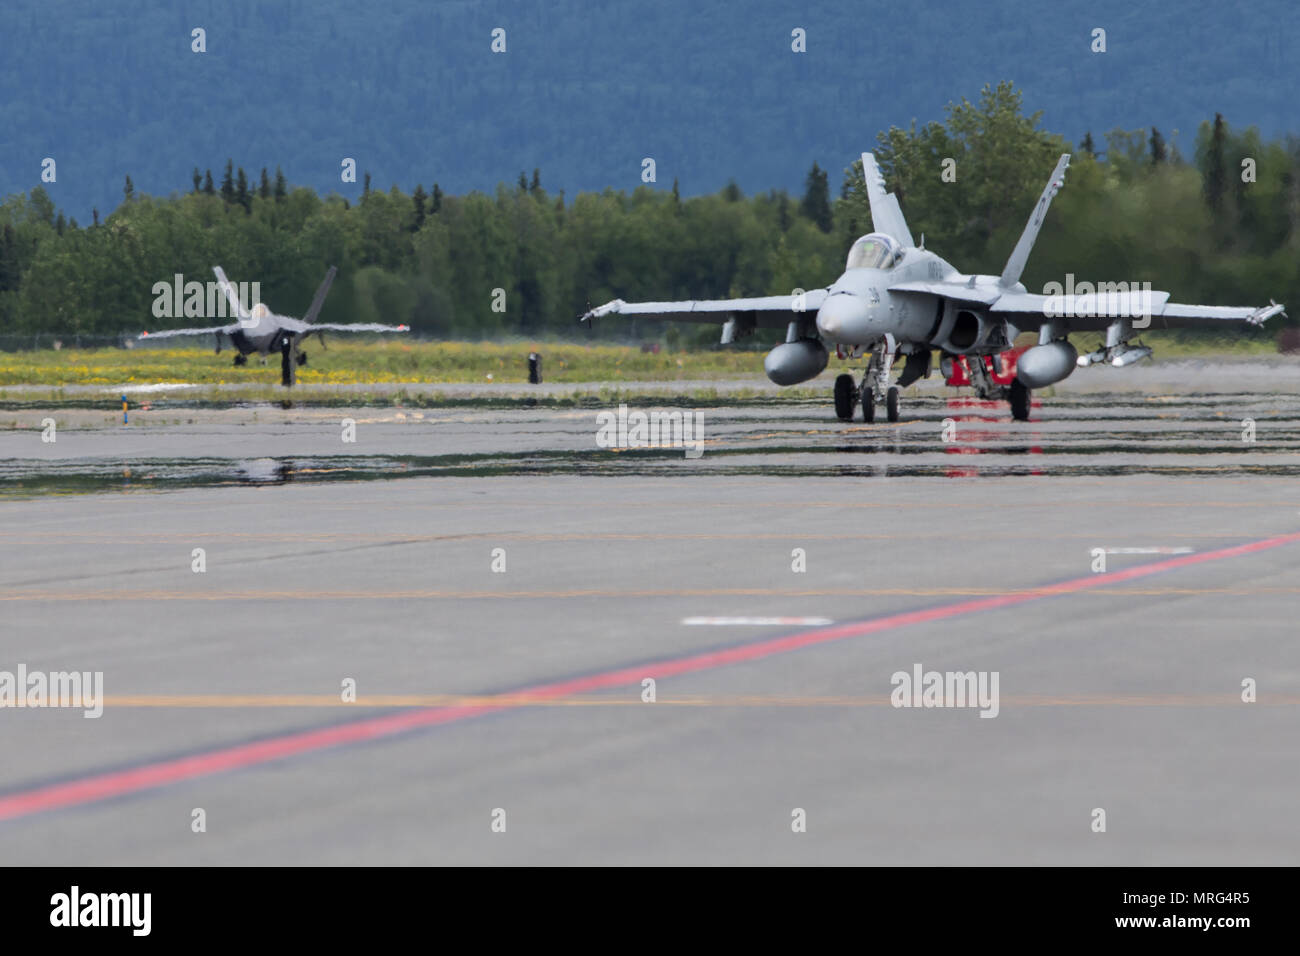 A U.S. Marine Corps F/A-18C Hornet with Marine Fighter Attack Squadron 251 taxis down a flightline during the joint training exercise Red Flag-Alaska 17-2 on Joint Base Elmendorf-Richardson, Alaska, June 13, 2017. Red Flag-Alaska provides an optimal training environment in the Indo-Asian Pacific region and focuses on improving ground, space, and cyberspace combat readiness and interoperability for U.S. and international forces. (U.S. Marine Corps photo by Lance Cpl. Koby I. Saunders) Stock Photo